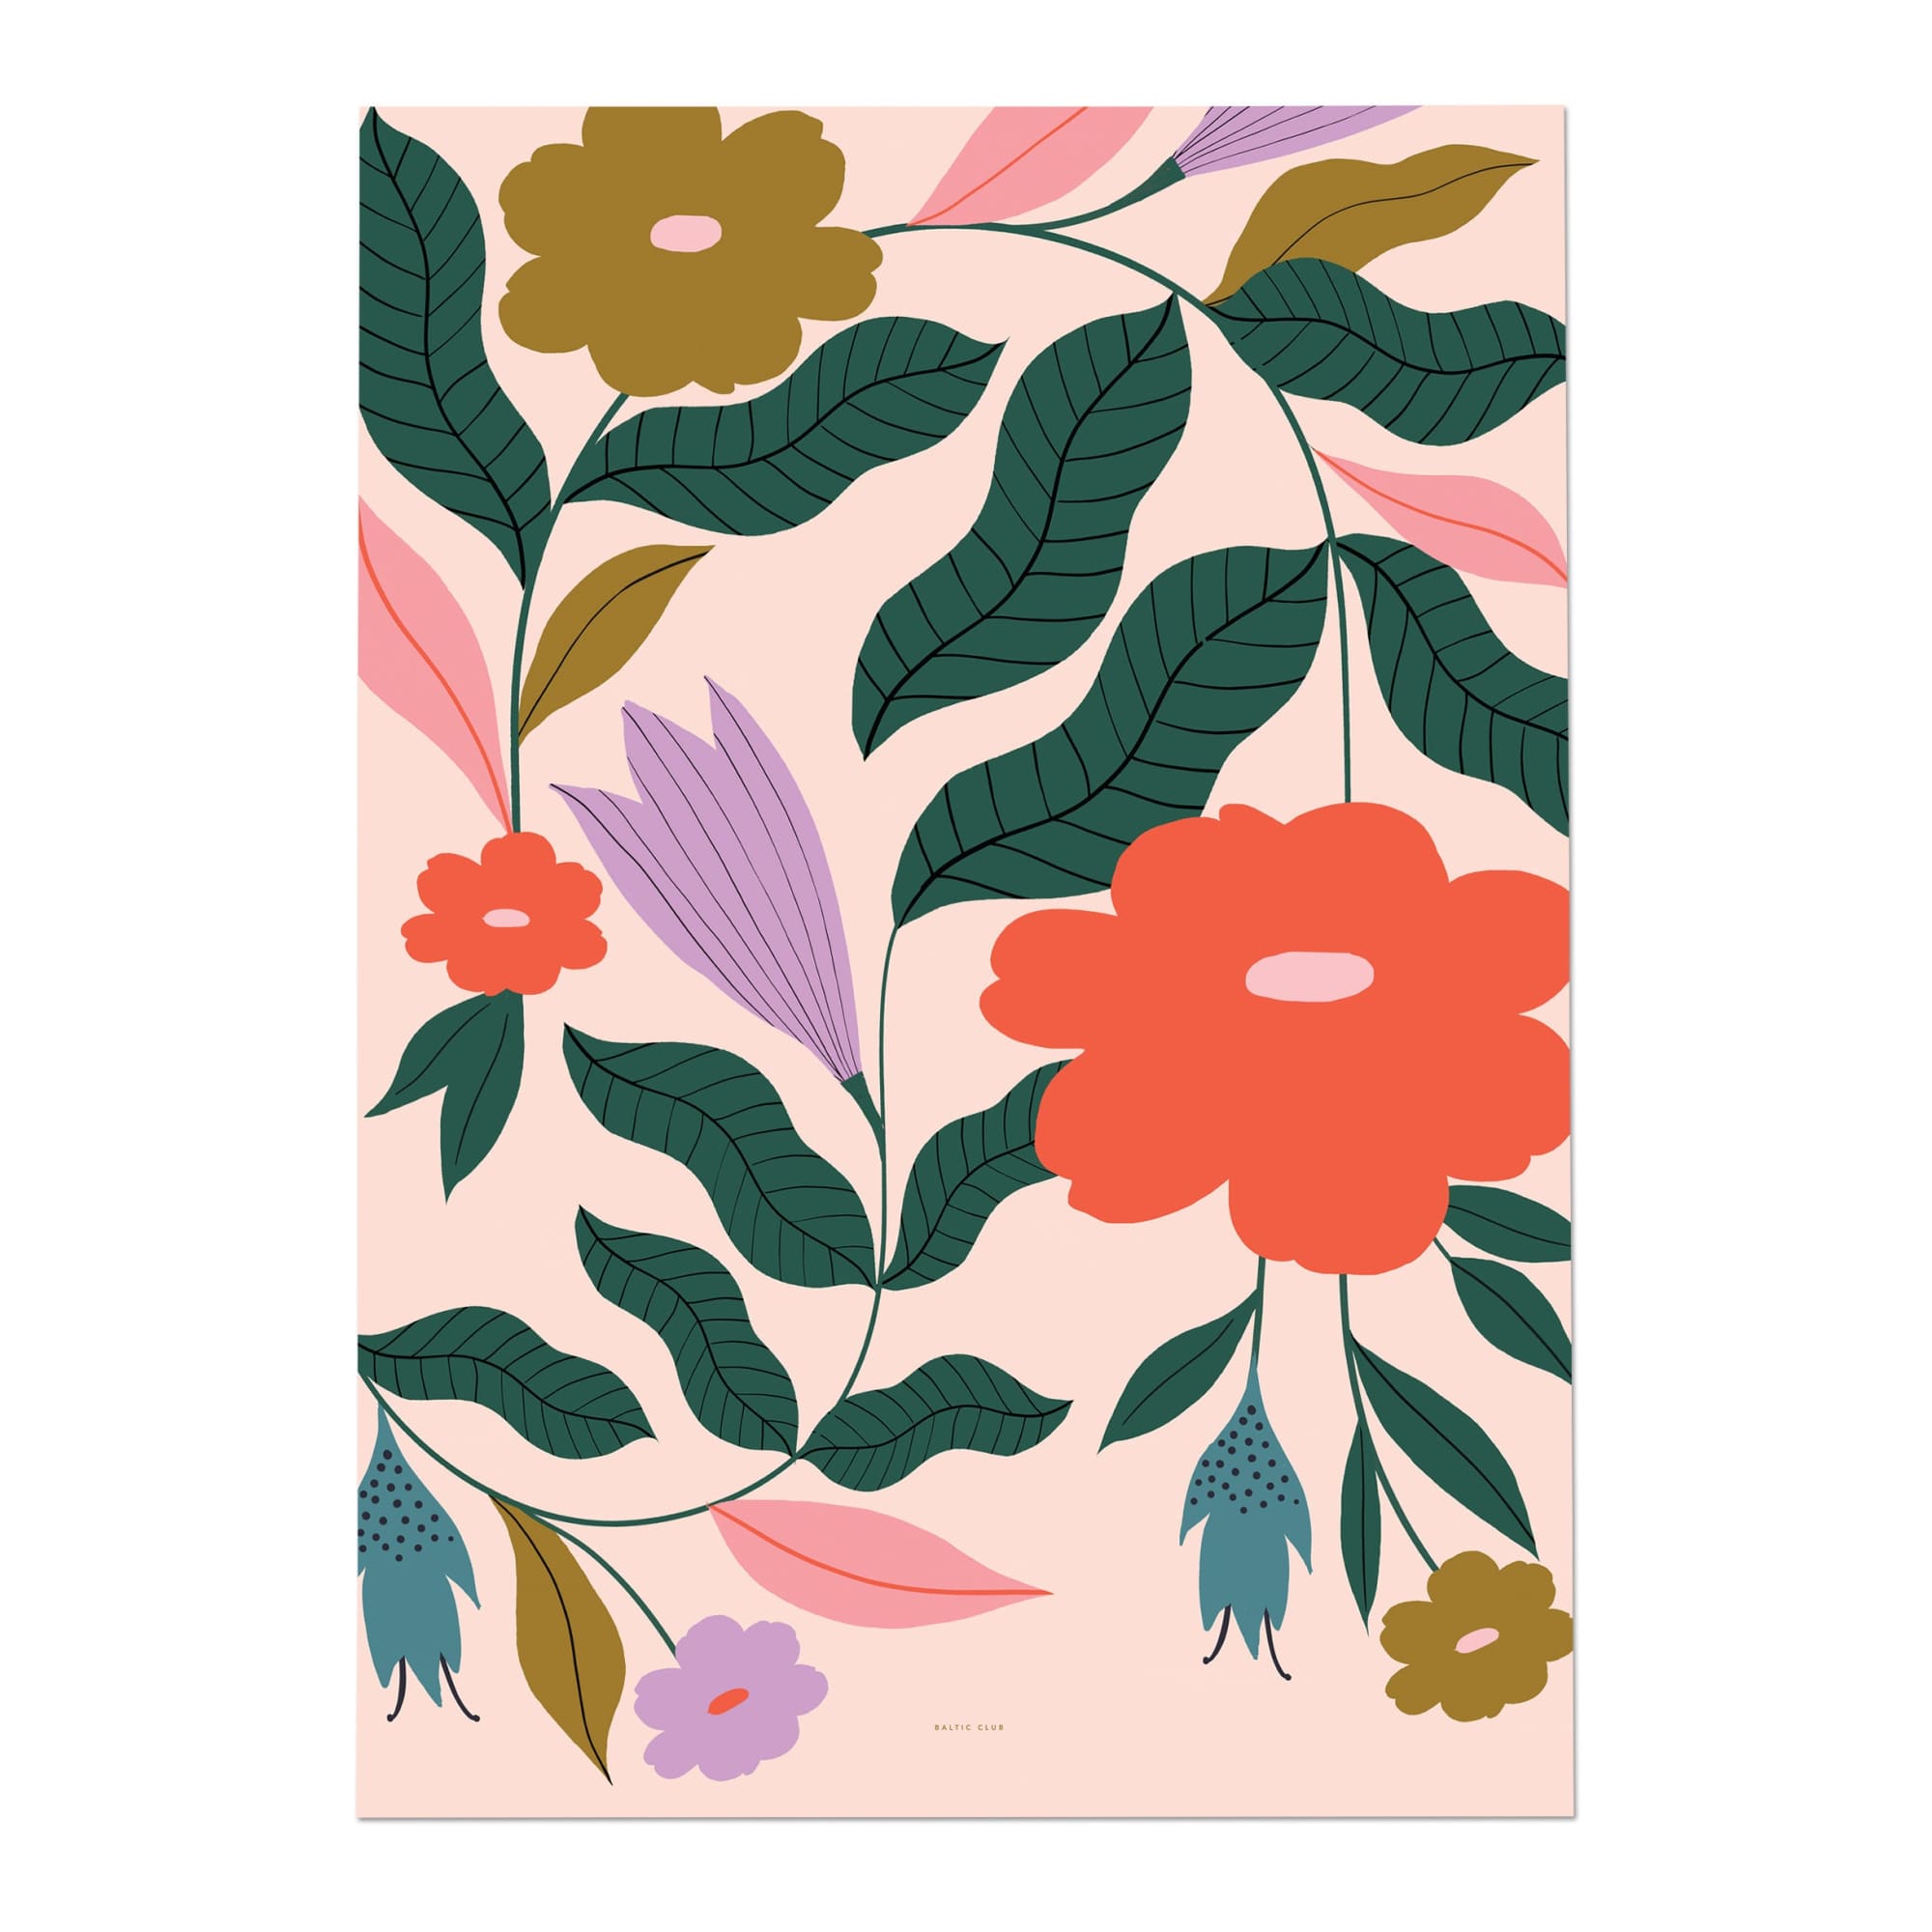 Flowers, by Susan Driscoll. An exclusive design for The Baltic Club.